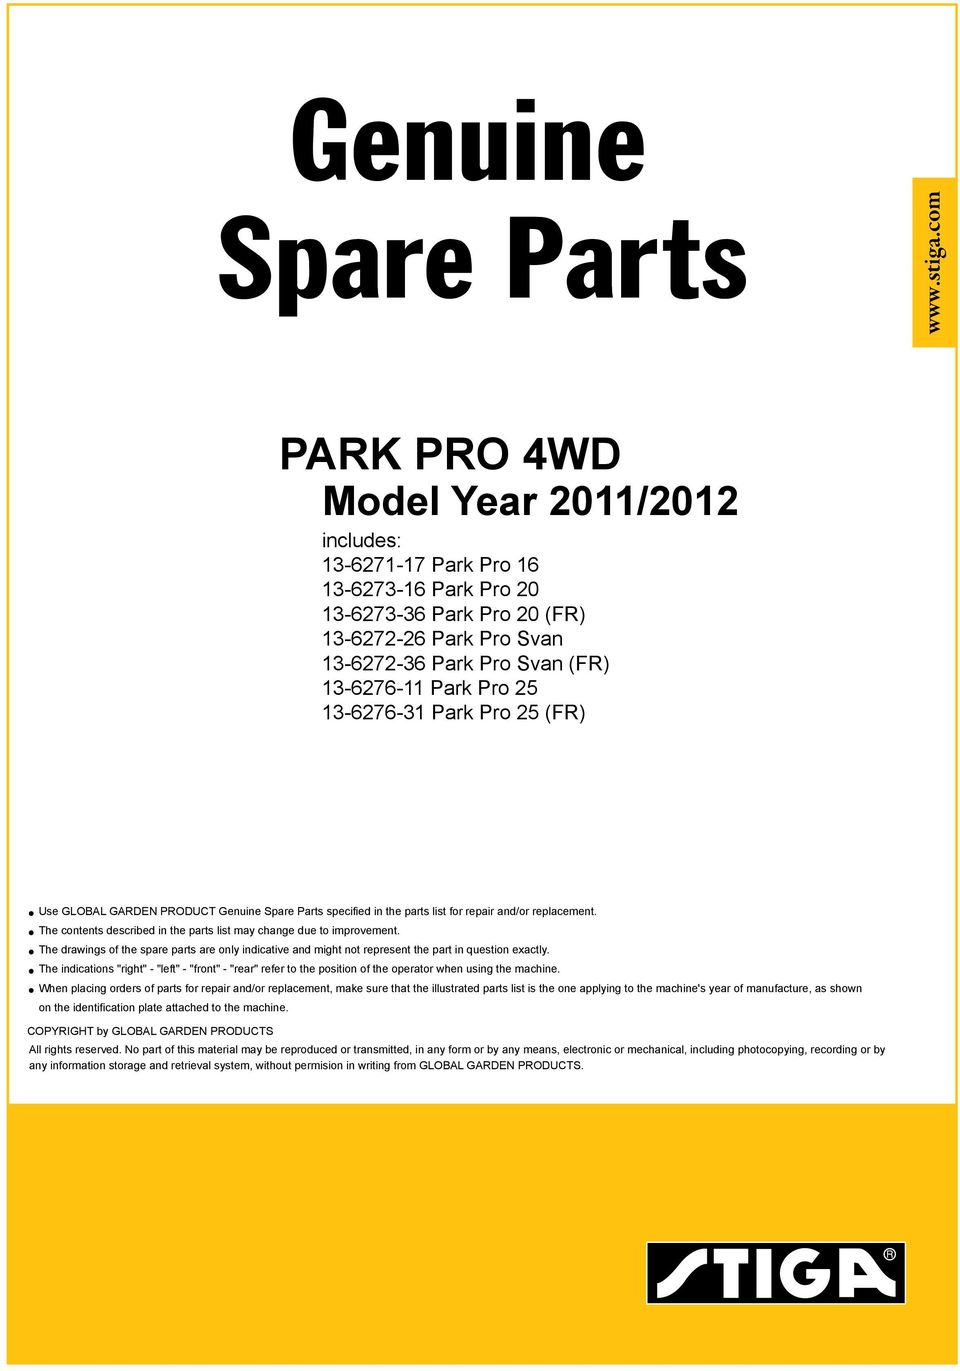 The drawings of the spare parts are only indicative and might not represent the part in question exactly.